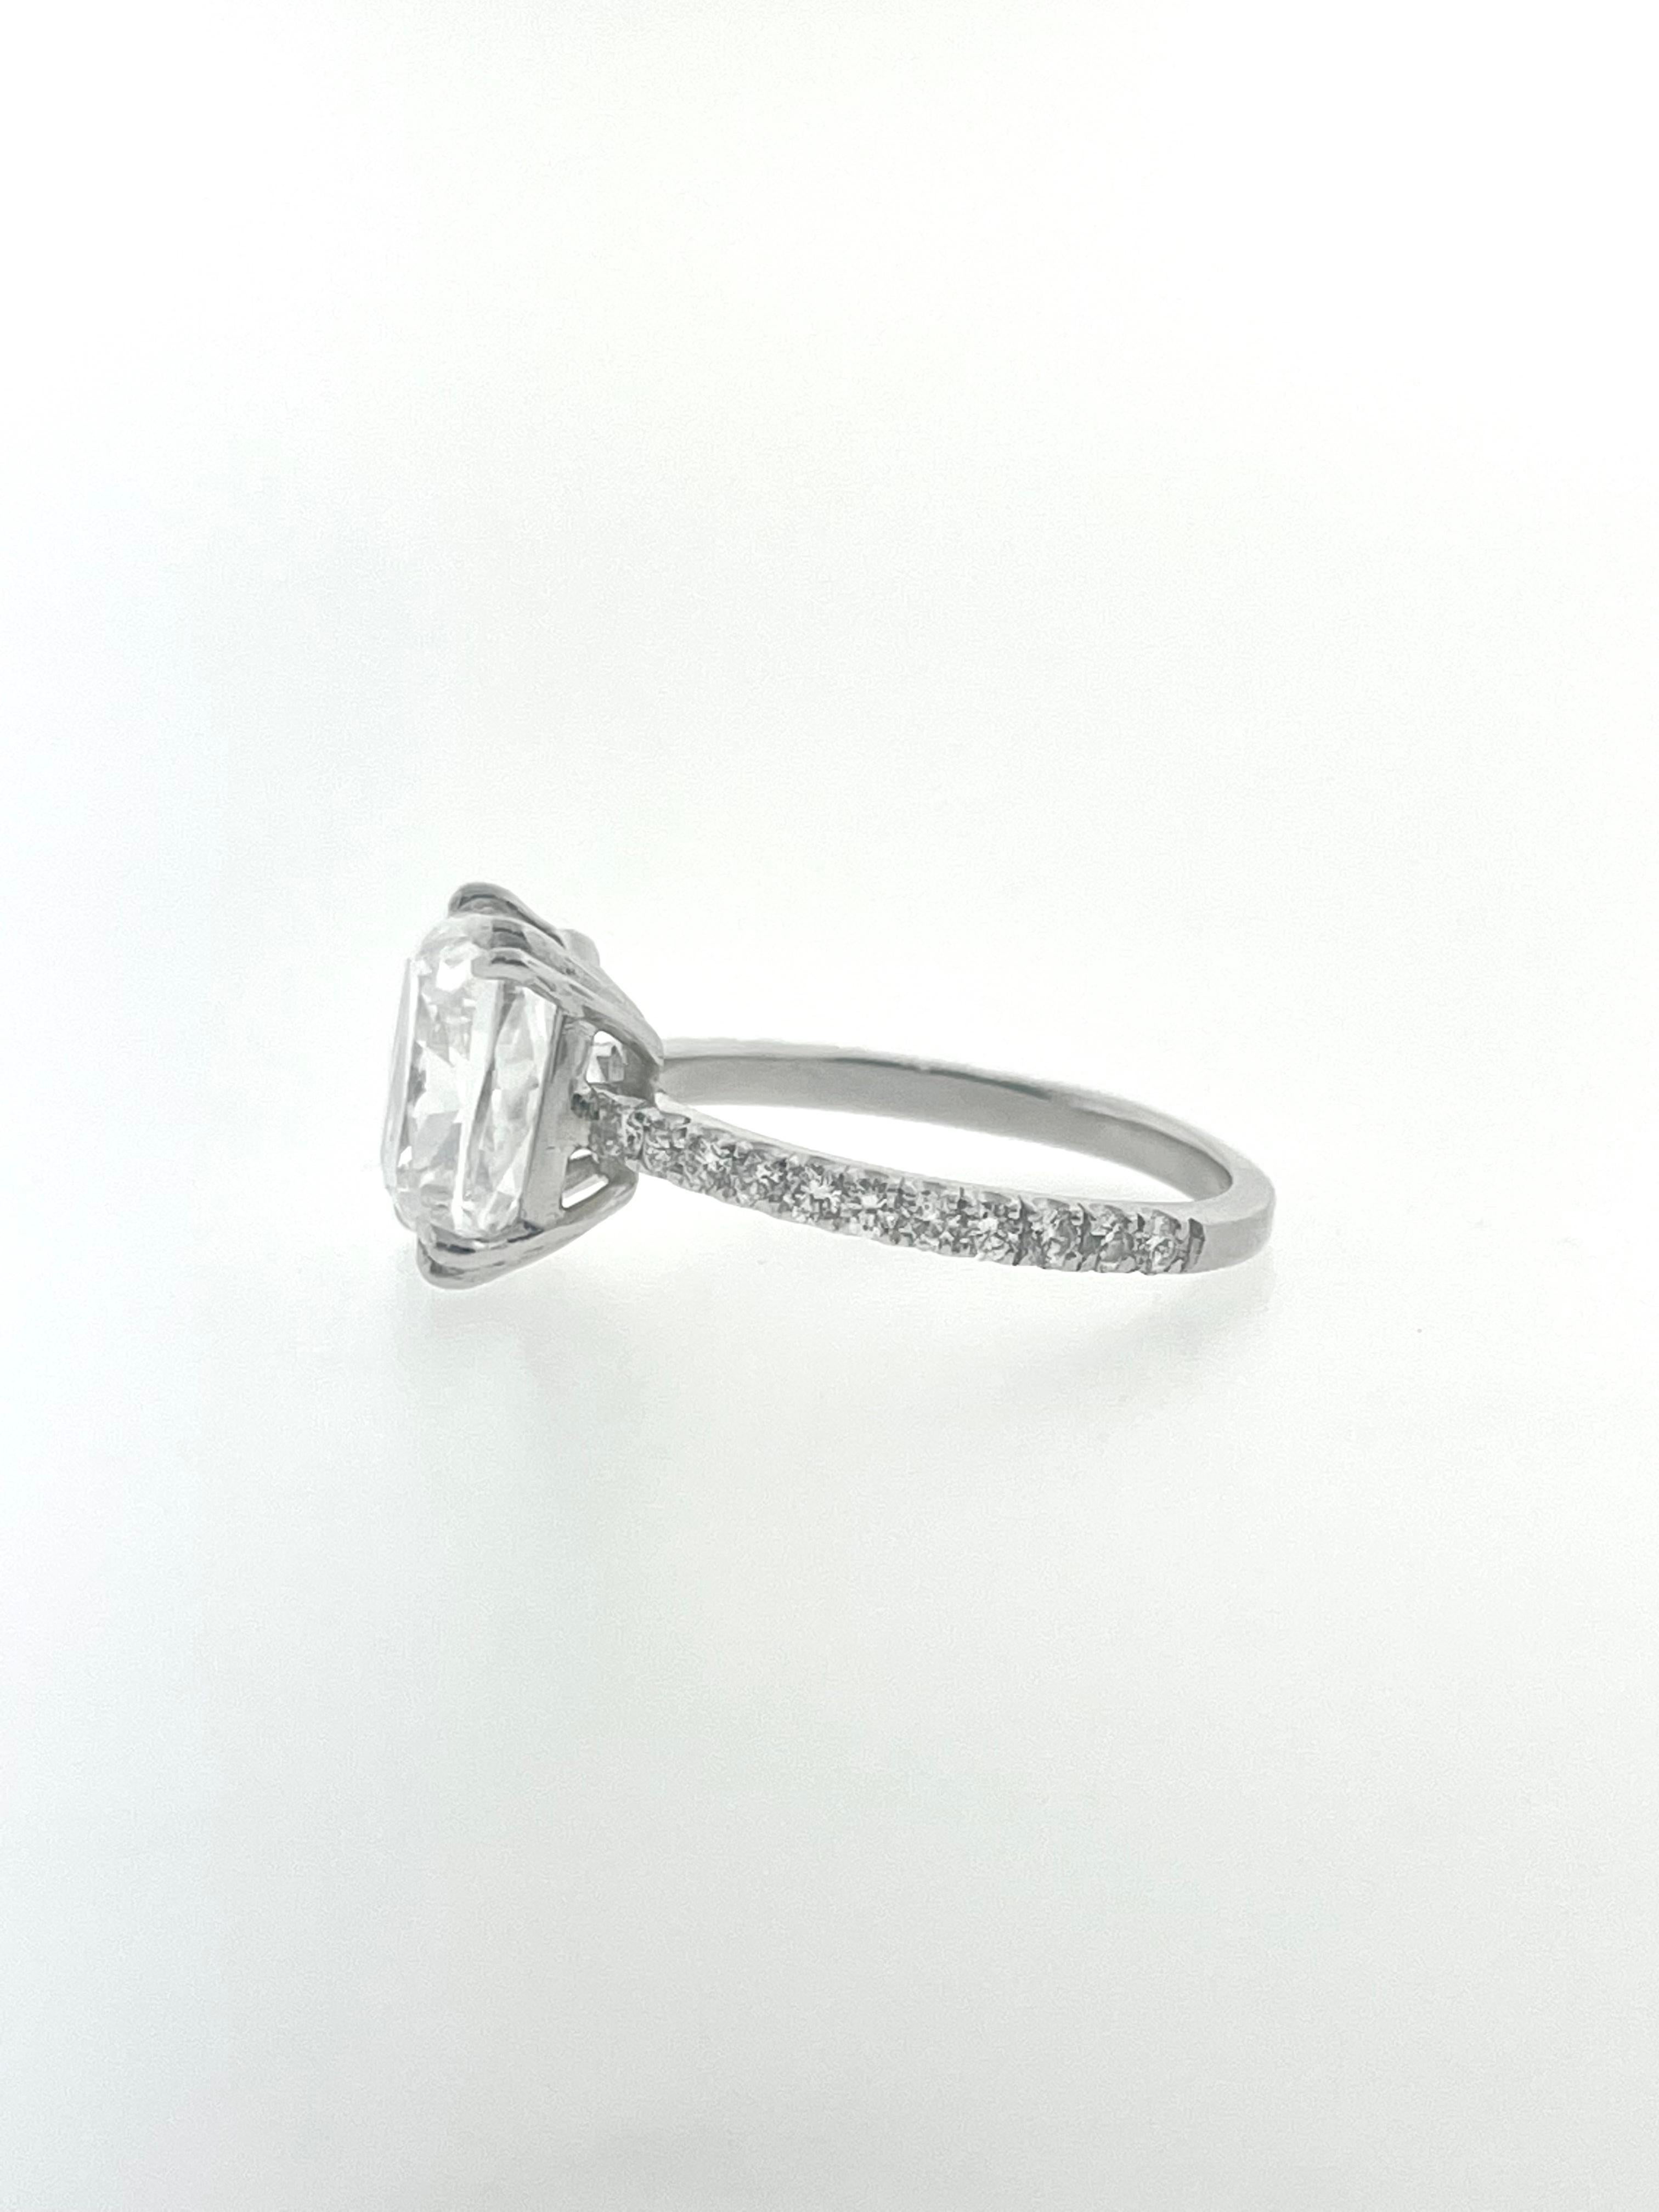 The sparkle on this diamond ... WOW! 

This beautiful 5.05ct Cushion Cut Diamond G-SI1 in Quality (GIA Certificate) is set in a 4 Prong mounting with diamonds three-quarters away around the shank. 

The stone can be bought by itself or you can buy